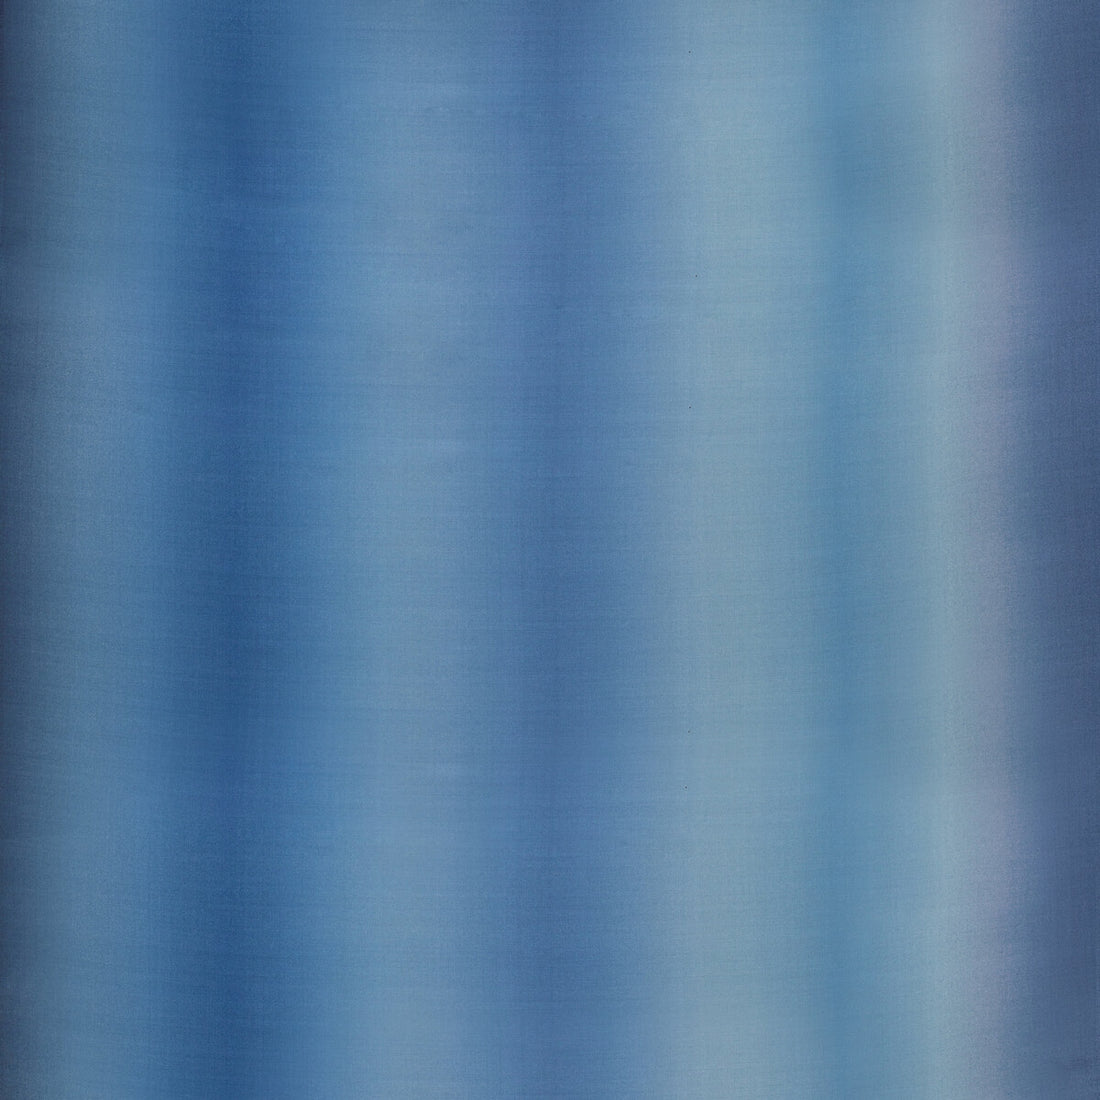 Mirage Stripe fabric in blue color - pattern 8022137.5.0 - by Brunschwig &amp; Fils in the Majorelle collection